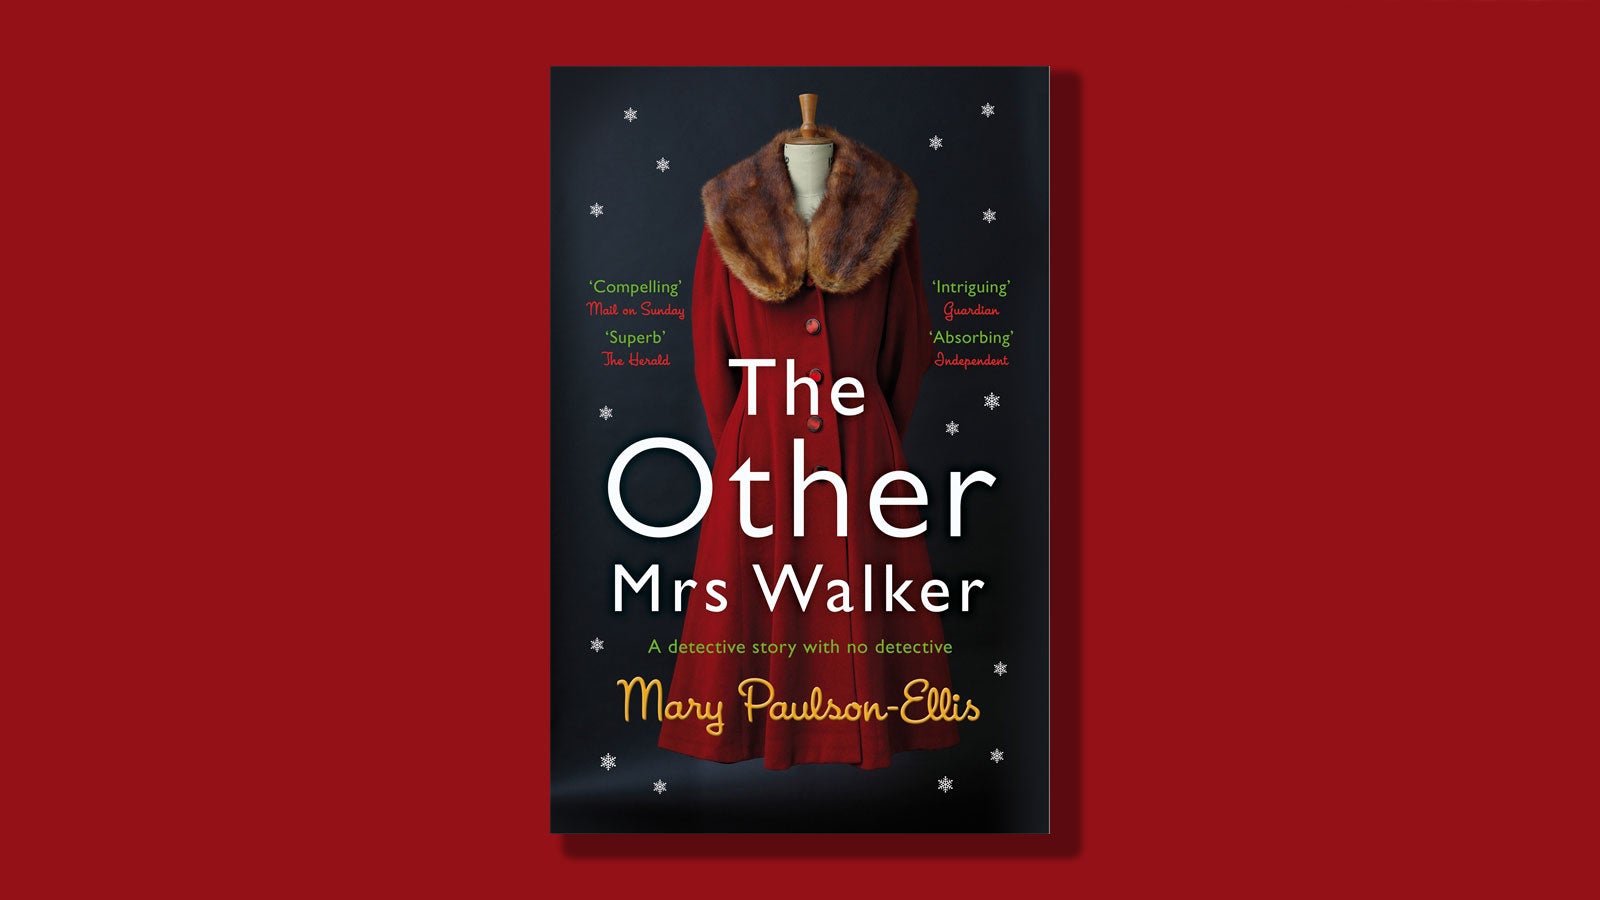 The Other Mrs Walker book cover on a red background